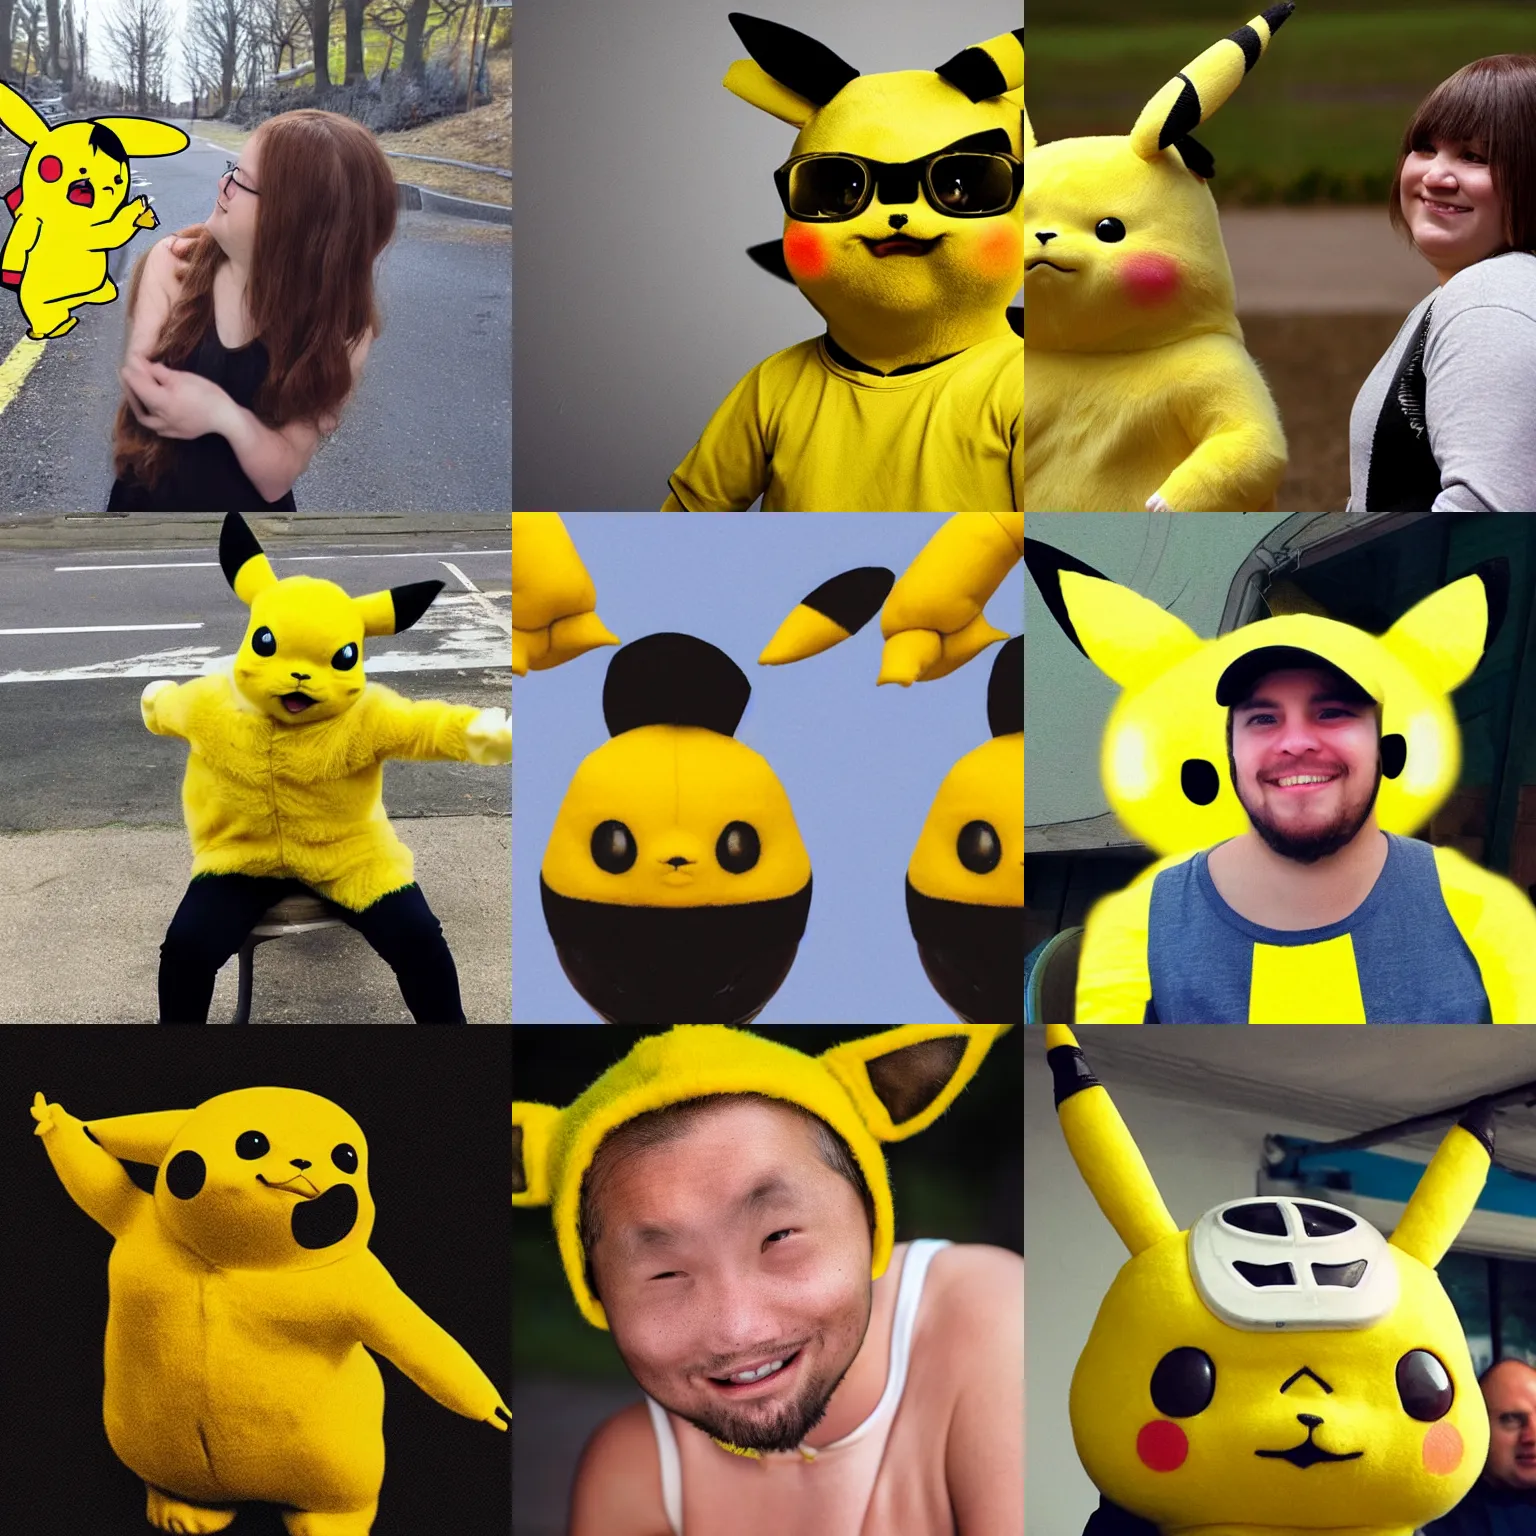 Prompt: photo of a human that resembles Pikachu